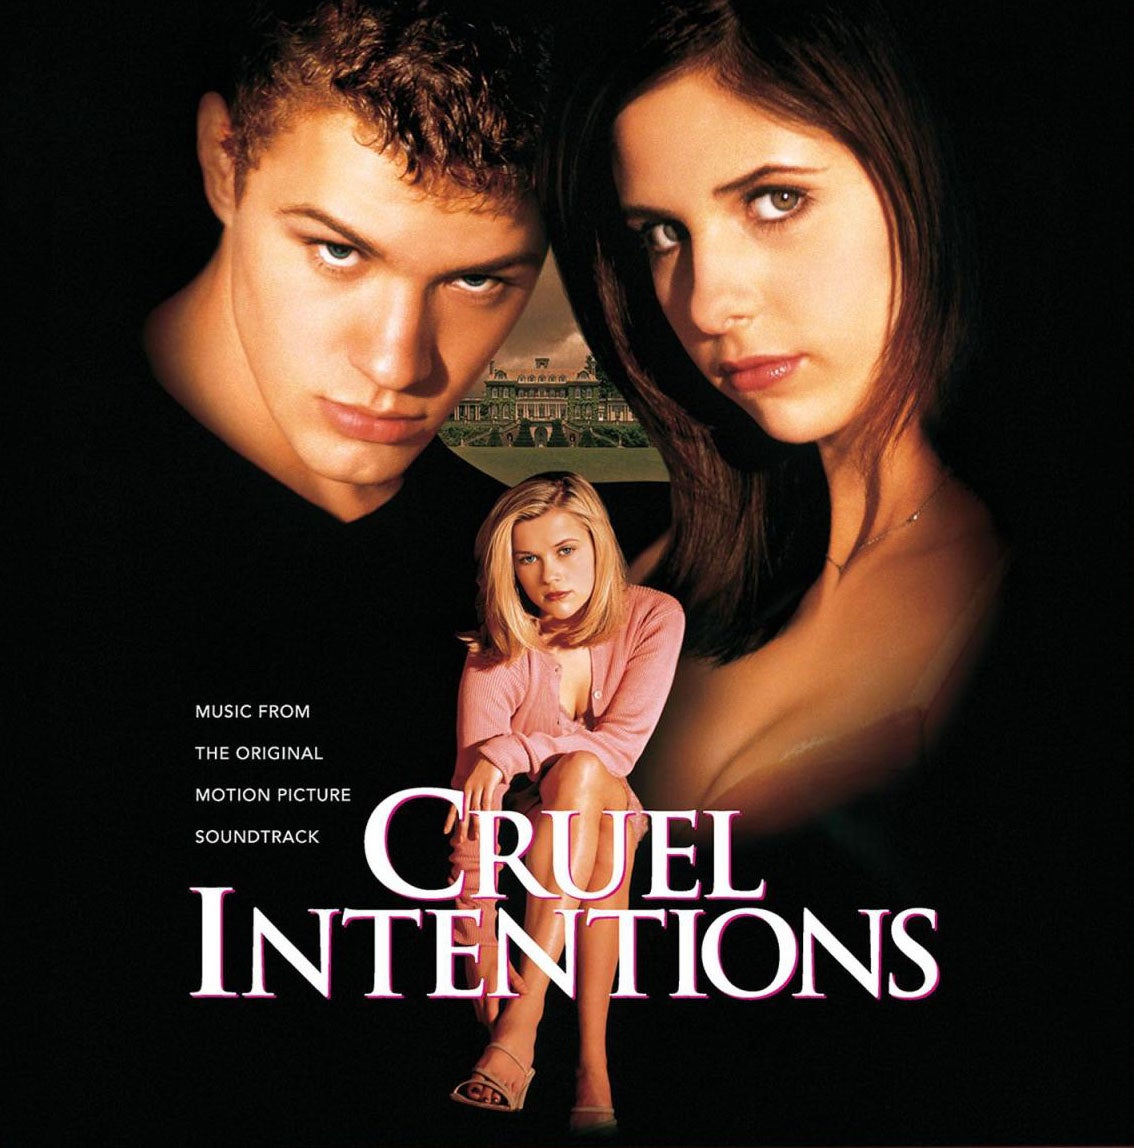 Cult classic: The soundtrack for ‘Cruel Intentions’